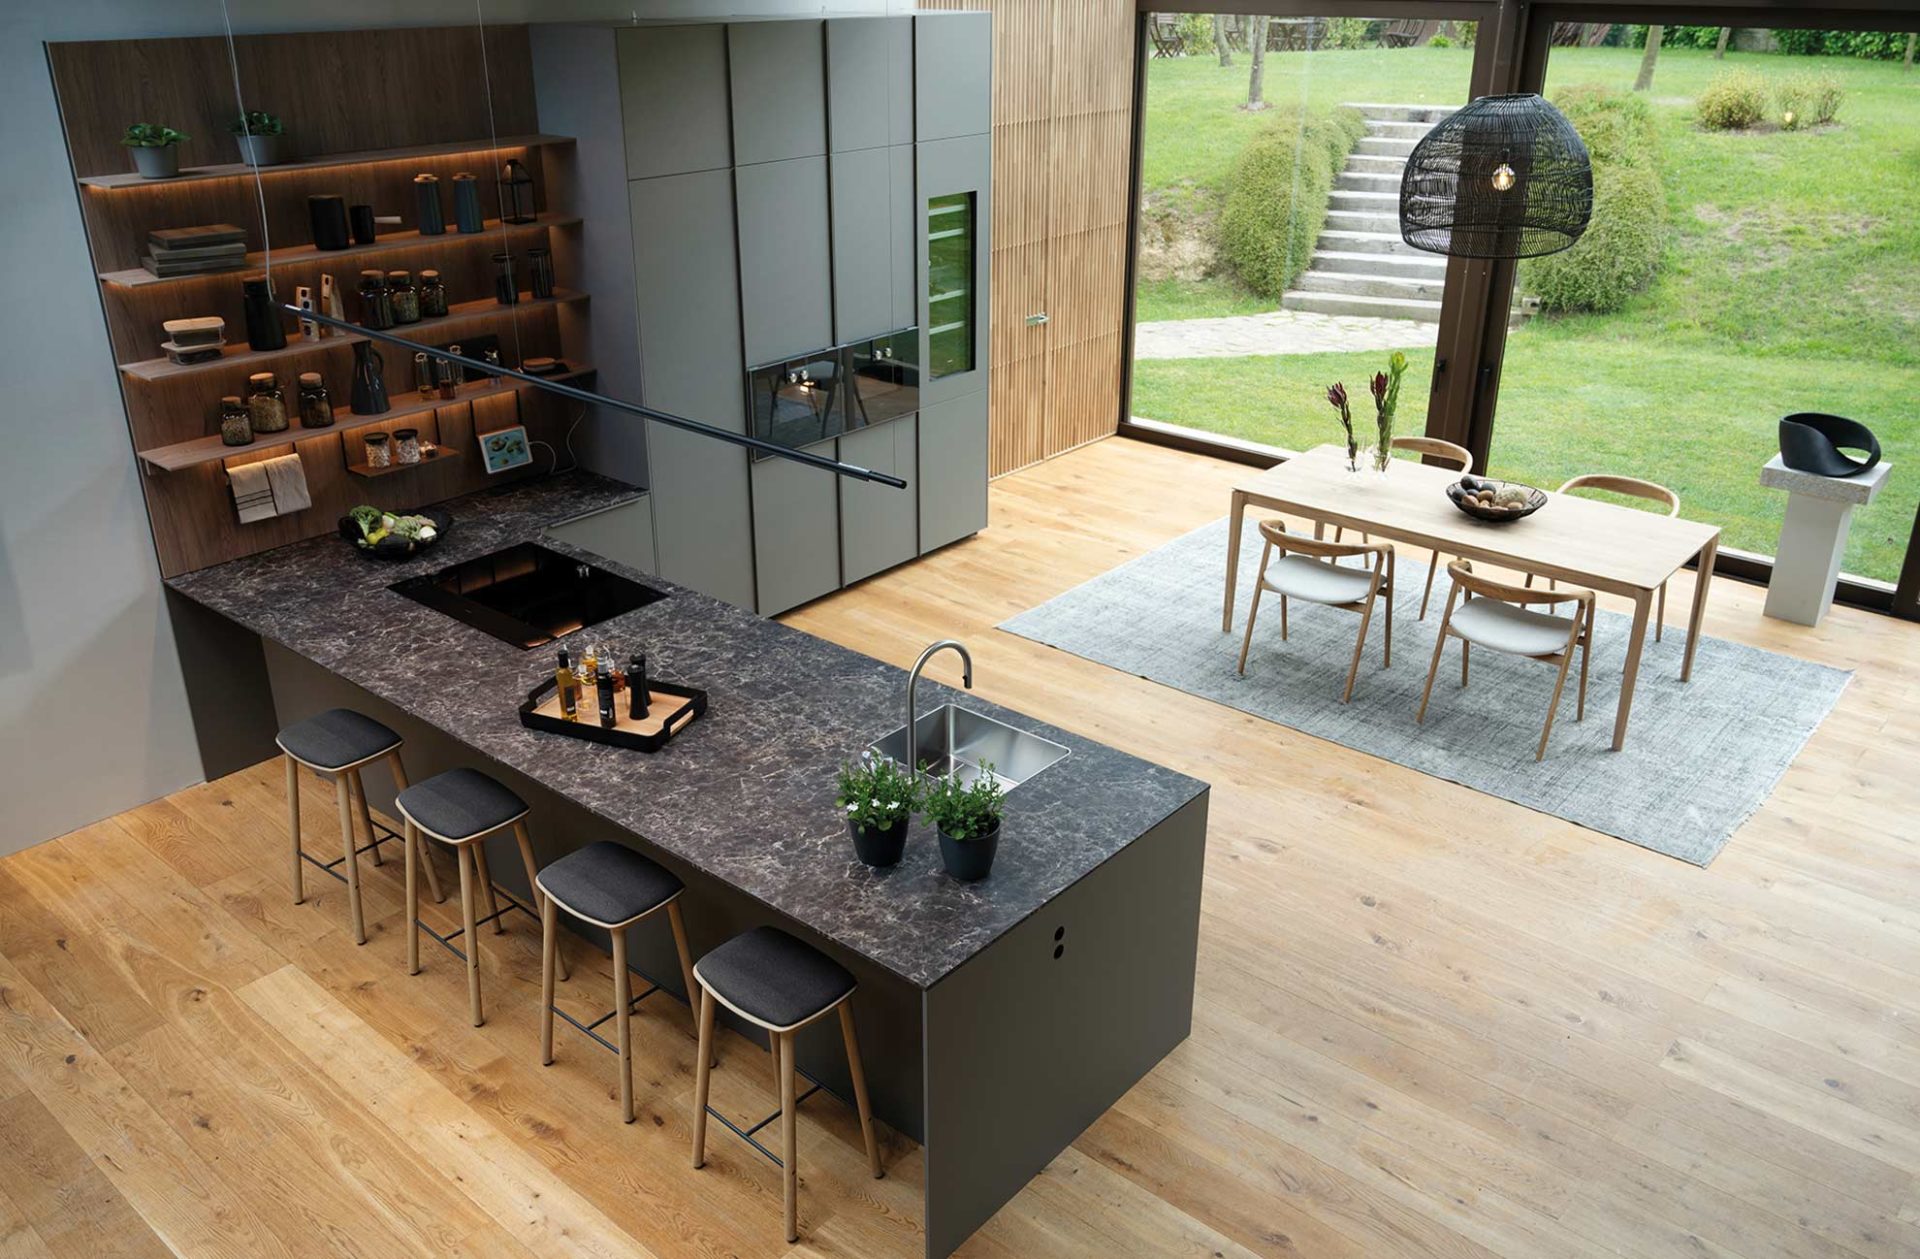 Large peninsula kitchen-dining room overlooking a garden. Grey breakfast bar with anthracite marble countertop, stove and sink.